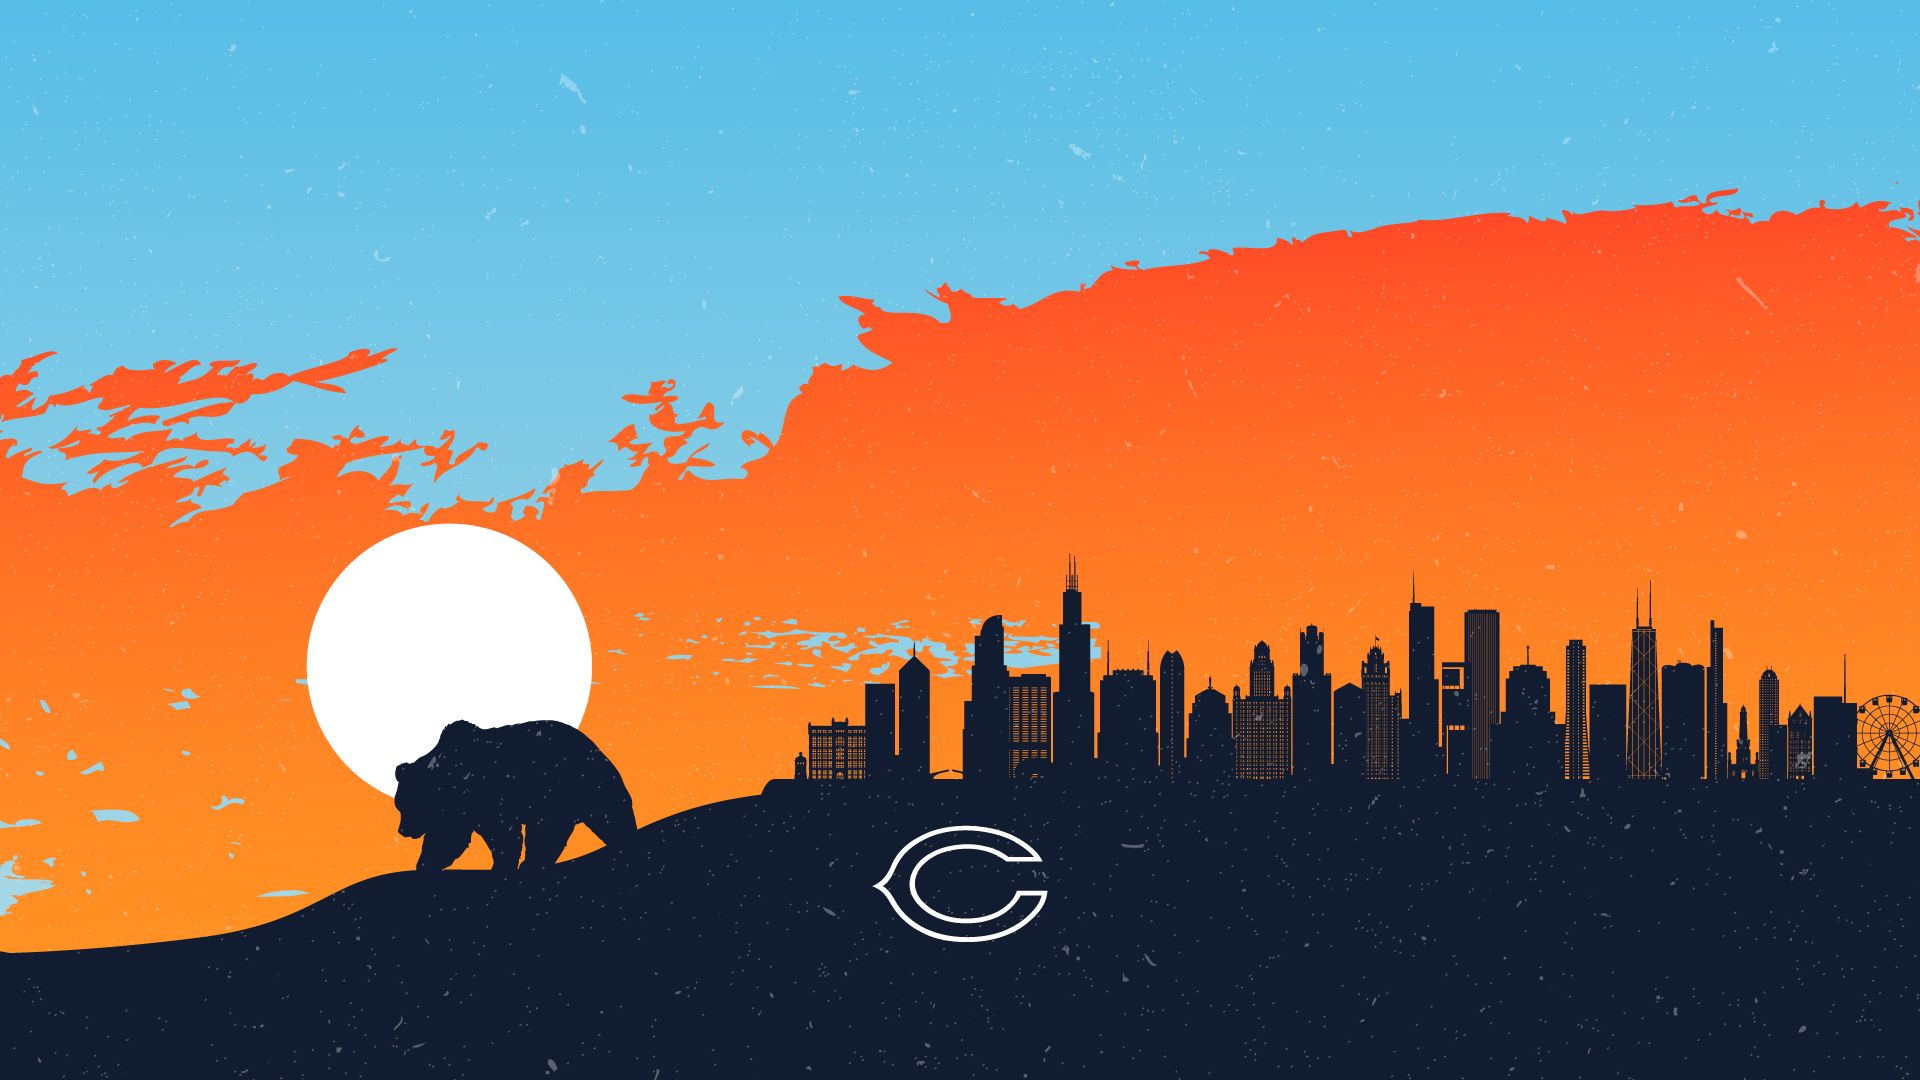 chicago bears background